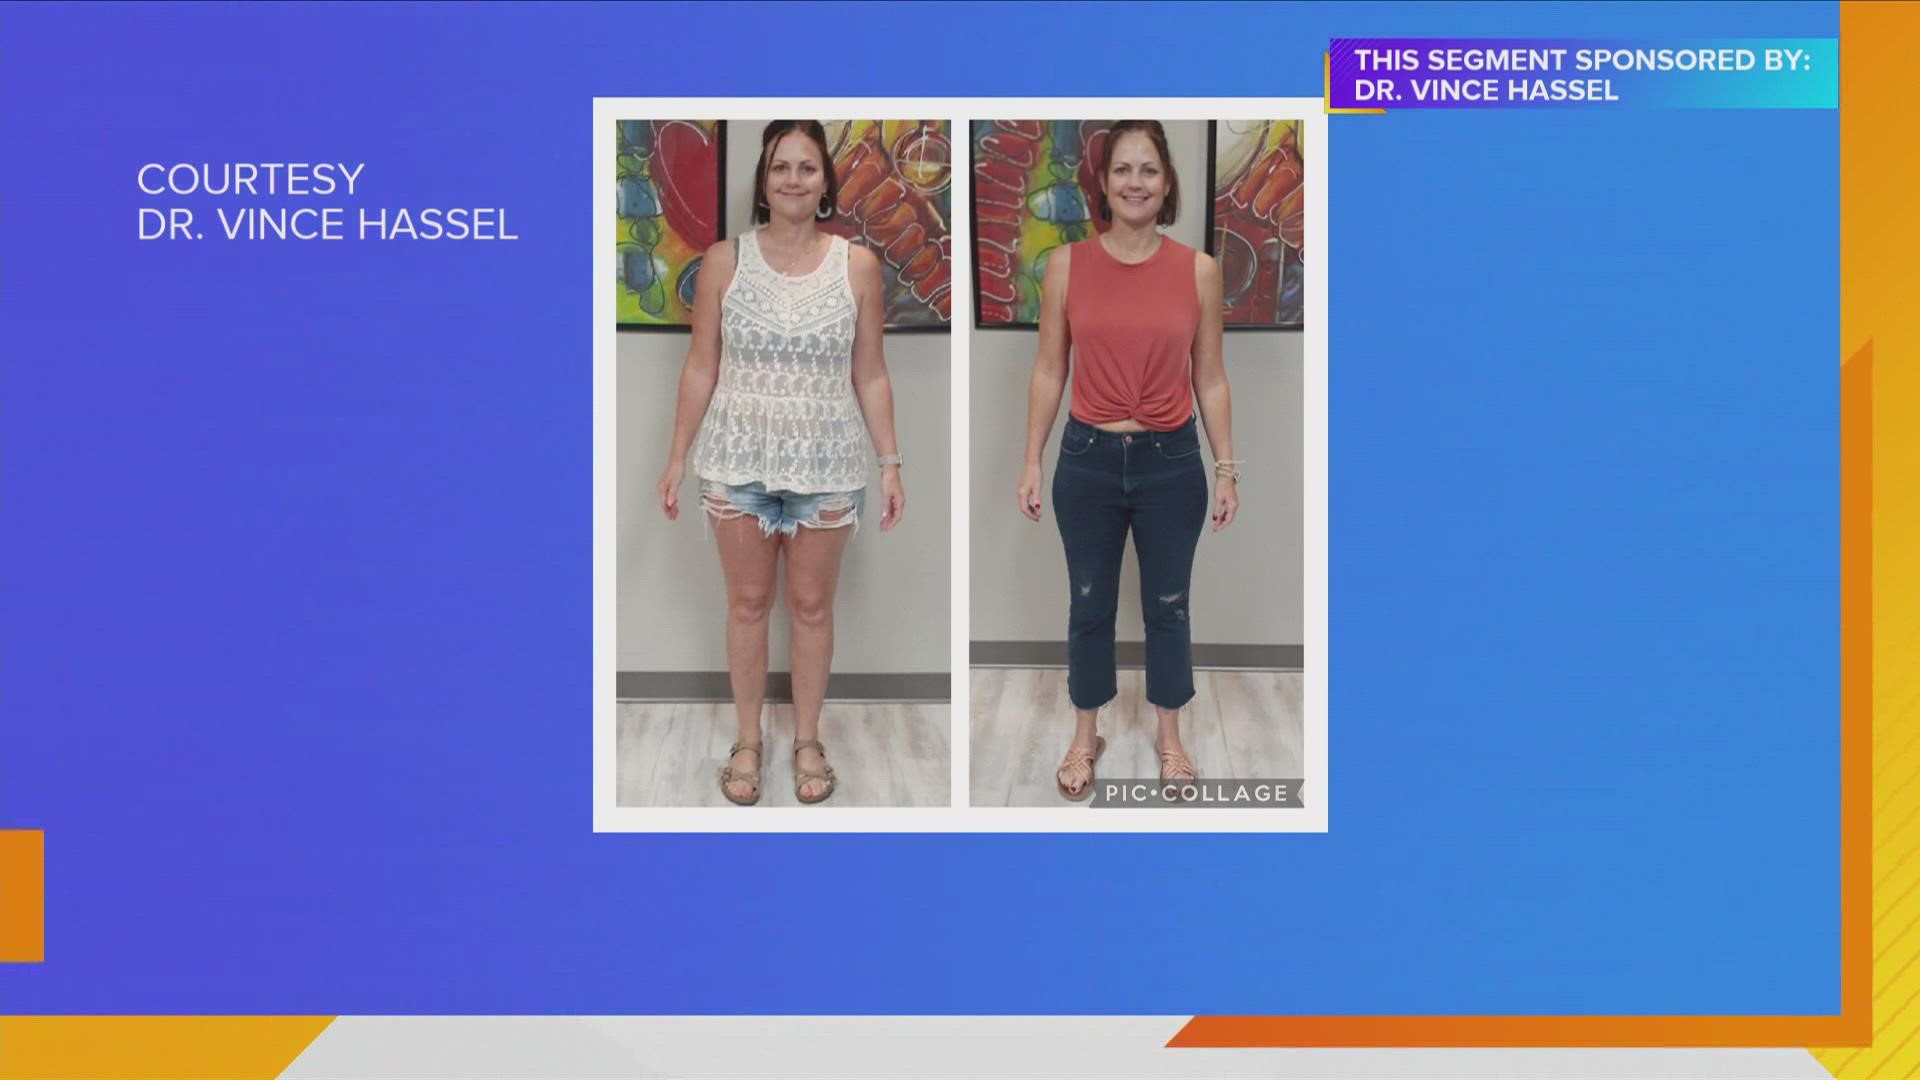 Tammy Stuart struggled with stubborn weight that would not come off until she found Dr. Vince Hassel's ChiroThin weight loss program | Paid Content